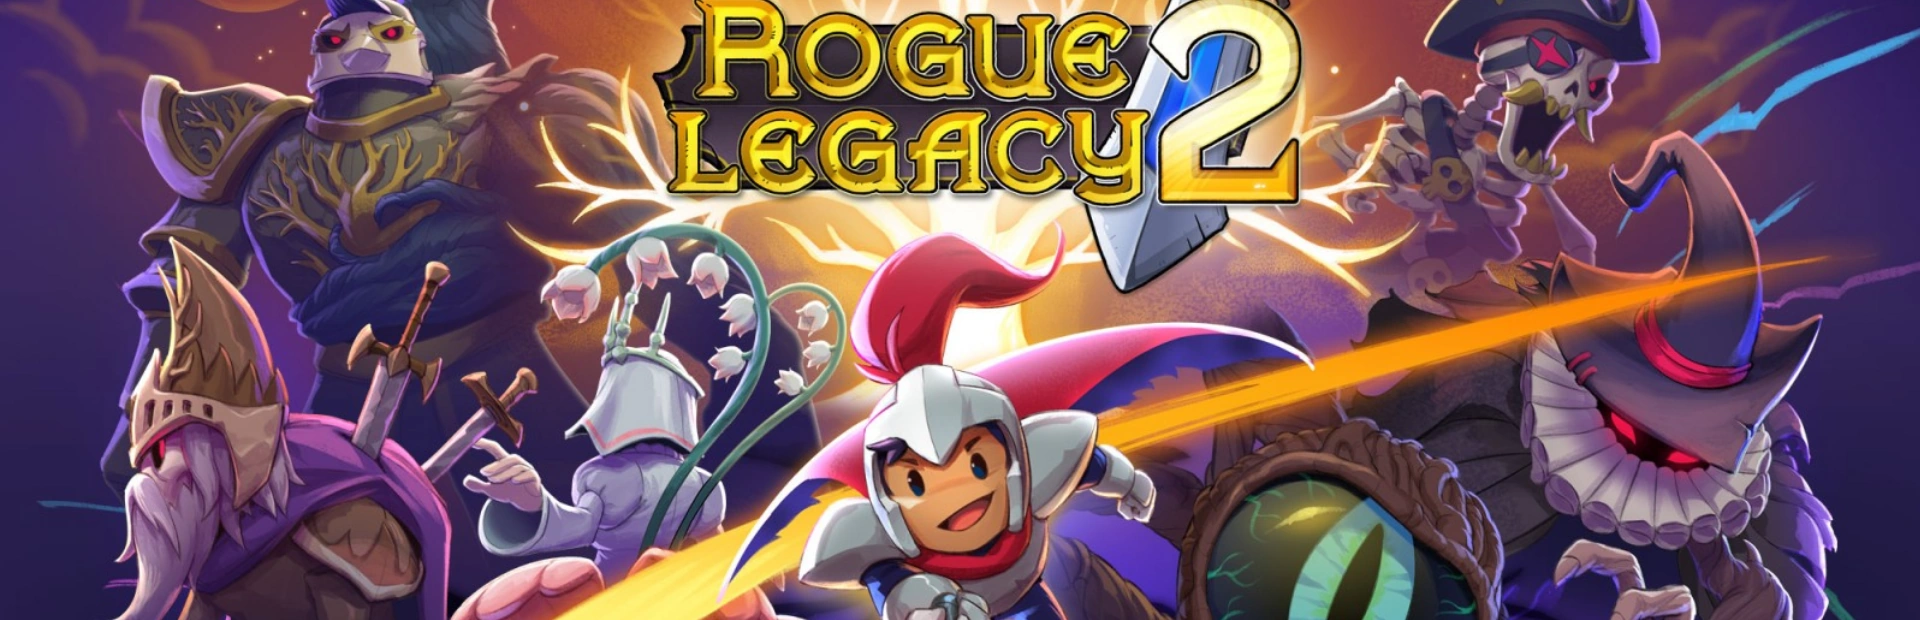 Rogue.Legacy.2.banner3 1